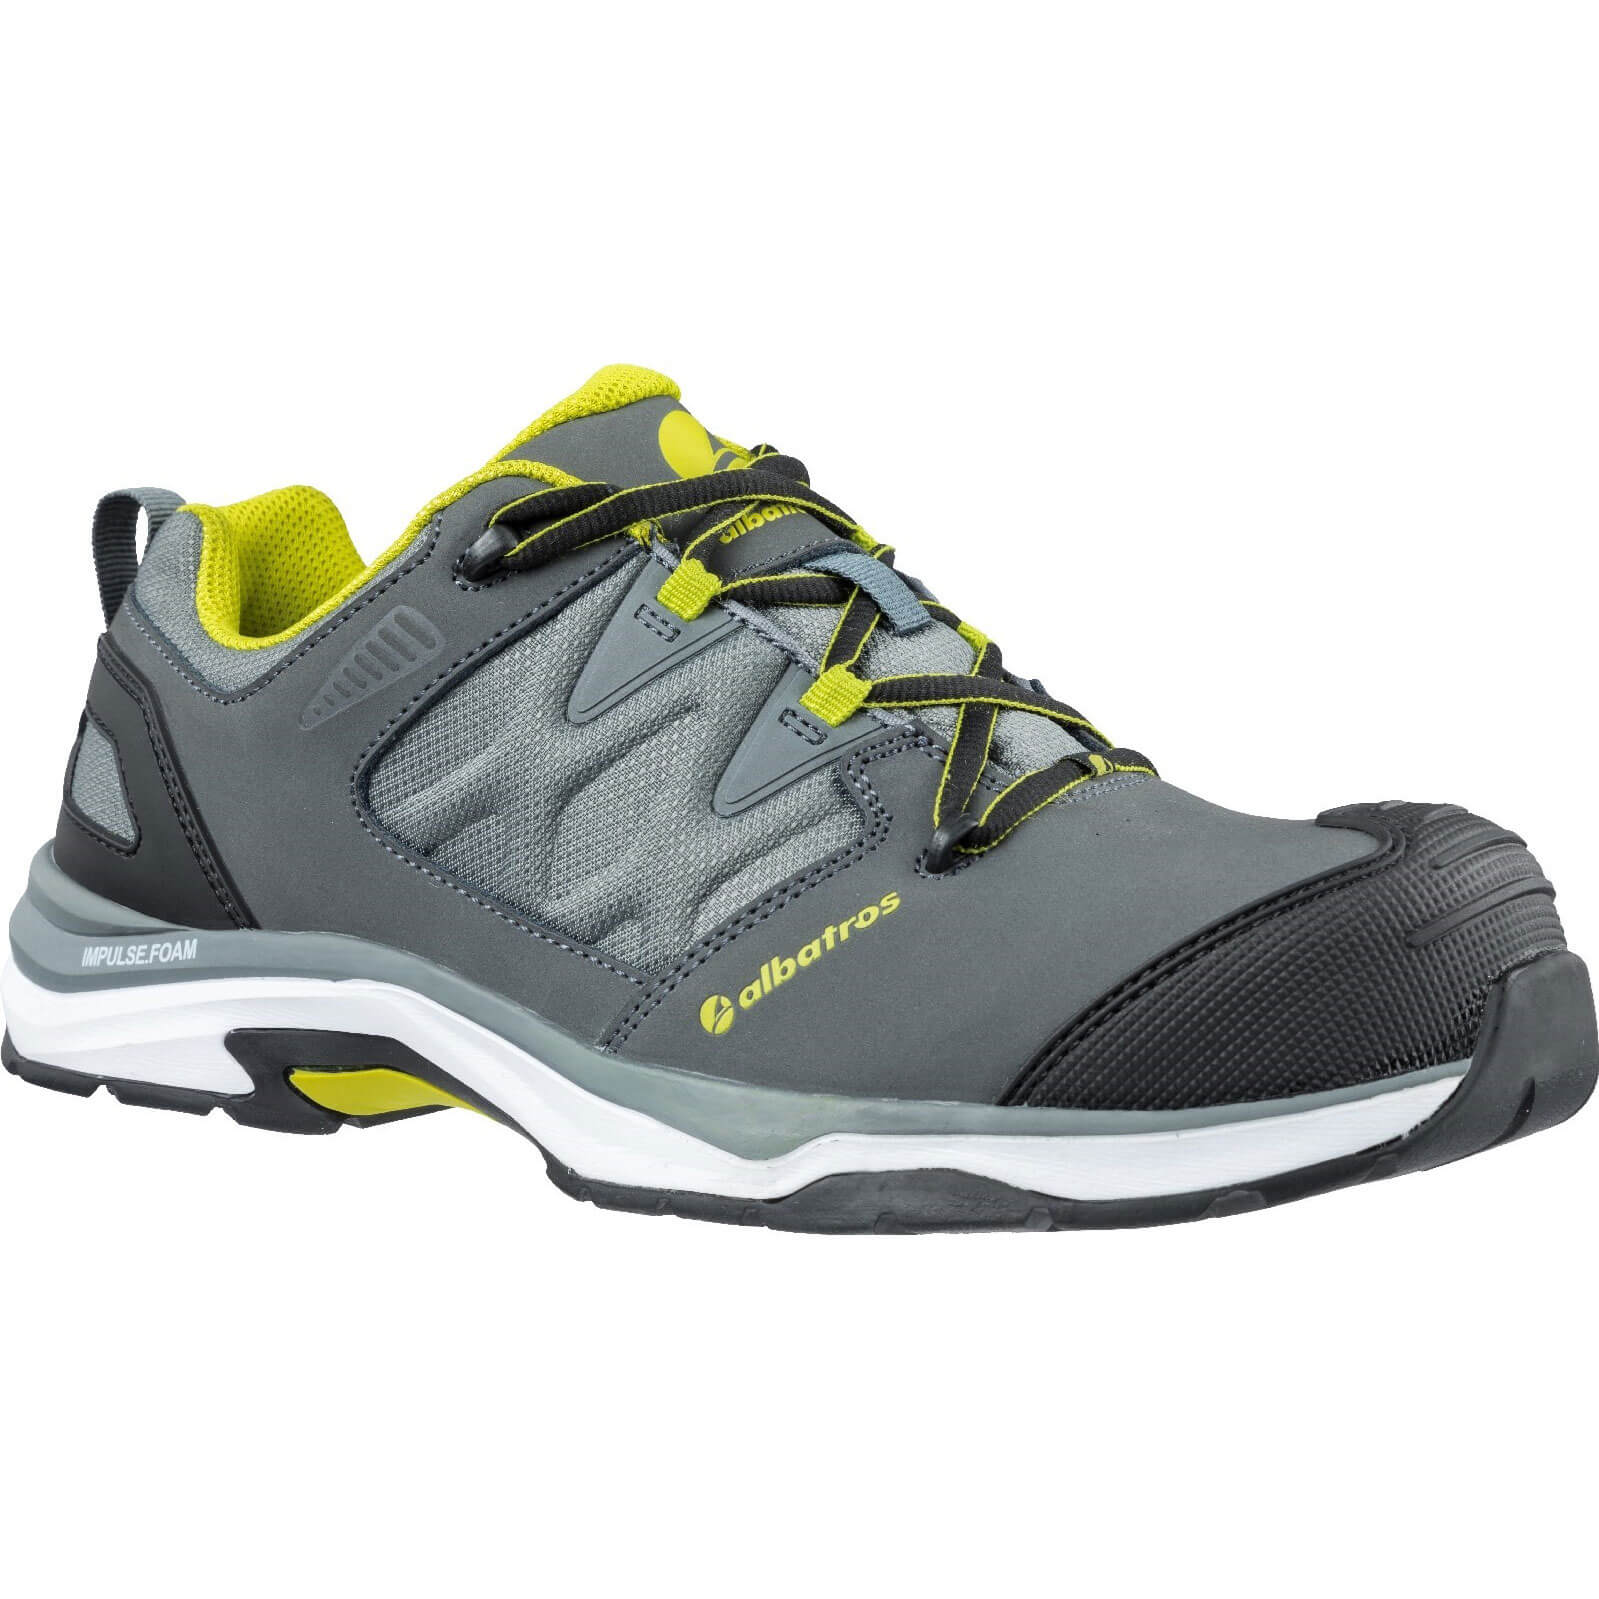 Image of Albatros Ultratrail Low Lace Up Safety Shoe Grey Size 11